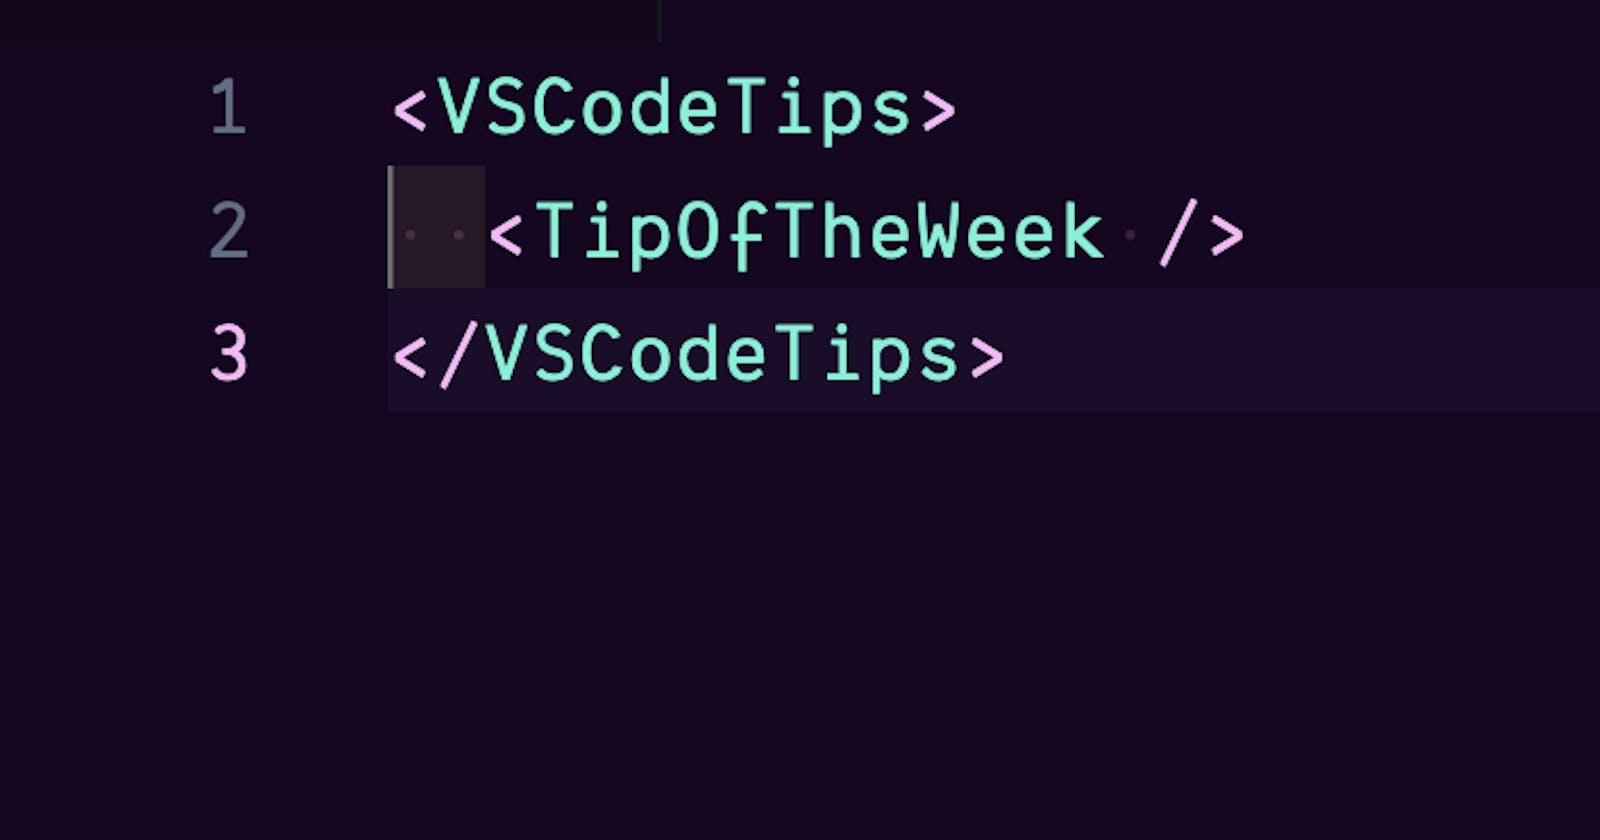 VS Code Tip of the Week: Keyboard Shortcuts for Moving Focus